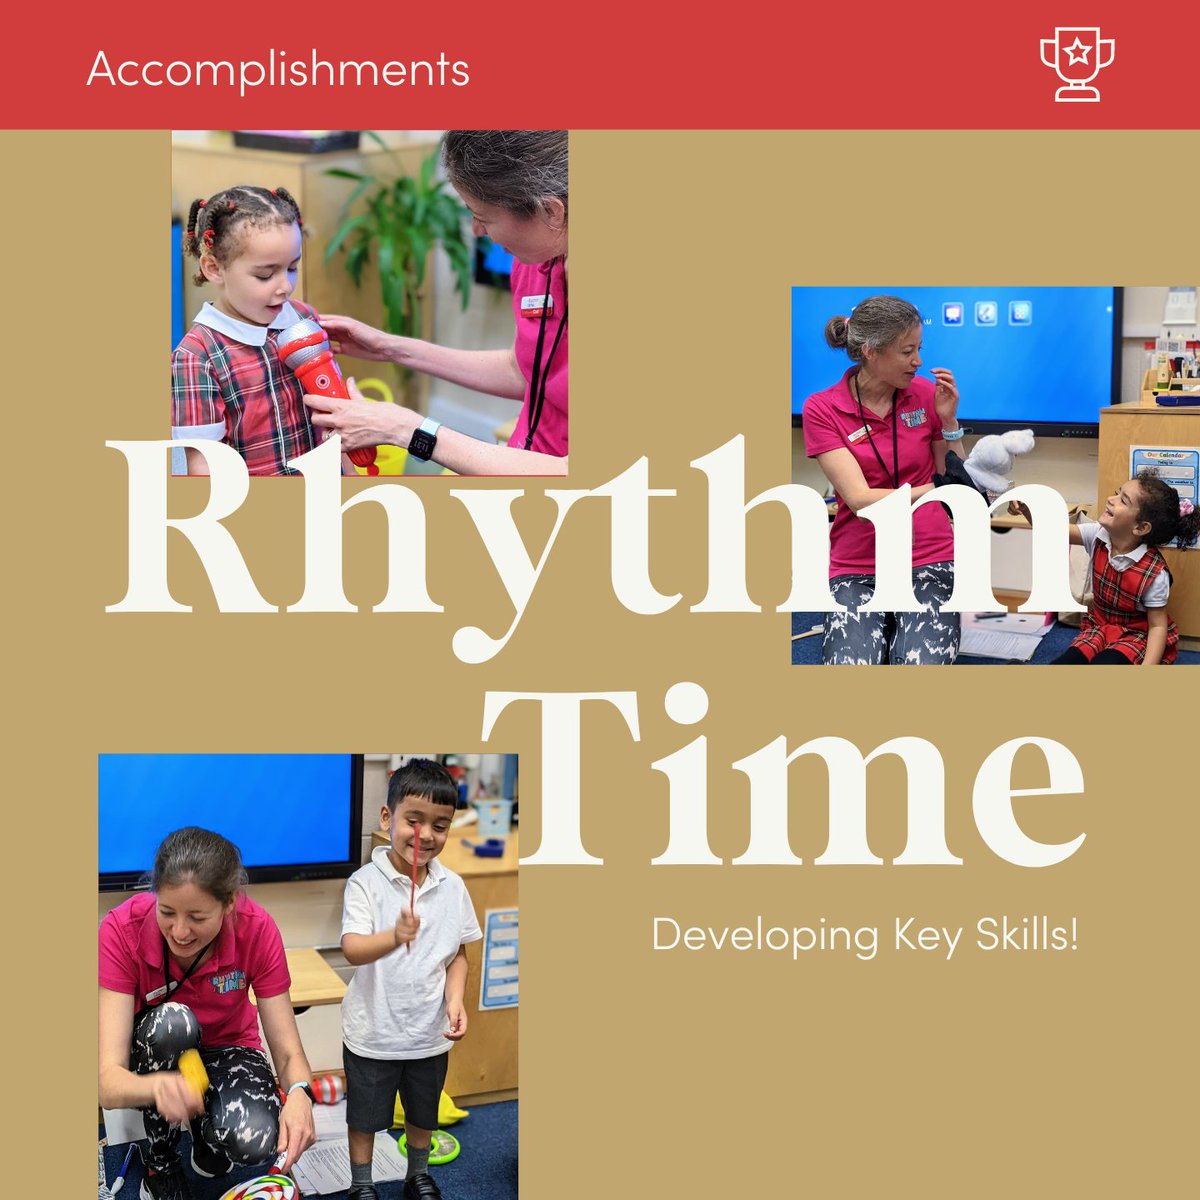 In the EYFS we believe that music plays a vital role in your child’s early development. To enhance our provision, each week in our EYFS department we have a visit from Rhythm Time who are passionate about the benefits of music for little ones.

#StJosephsPrep #EYFS #RhythmTime